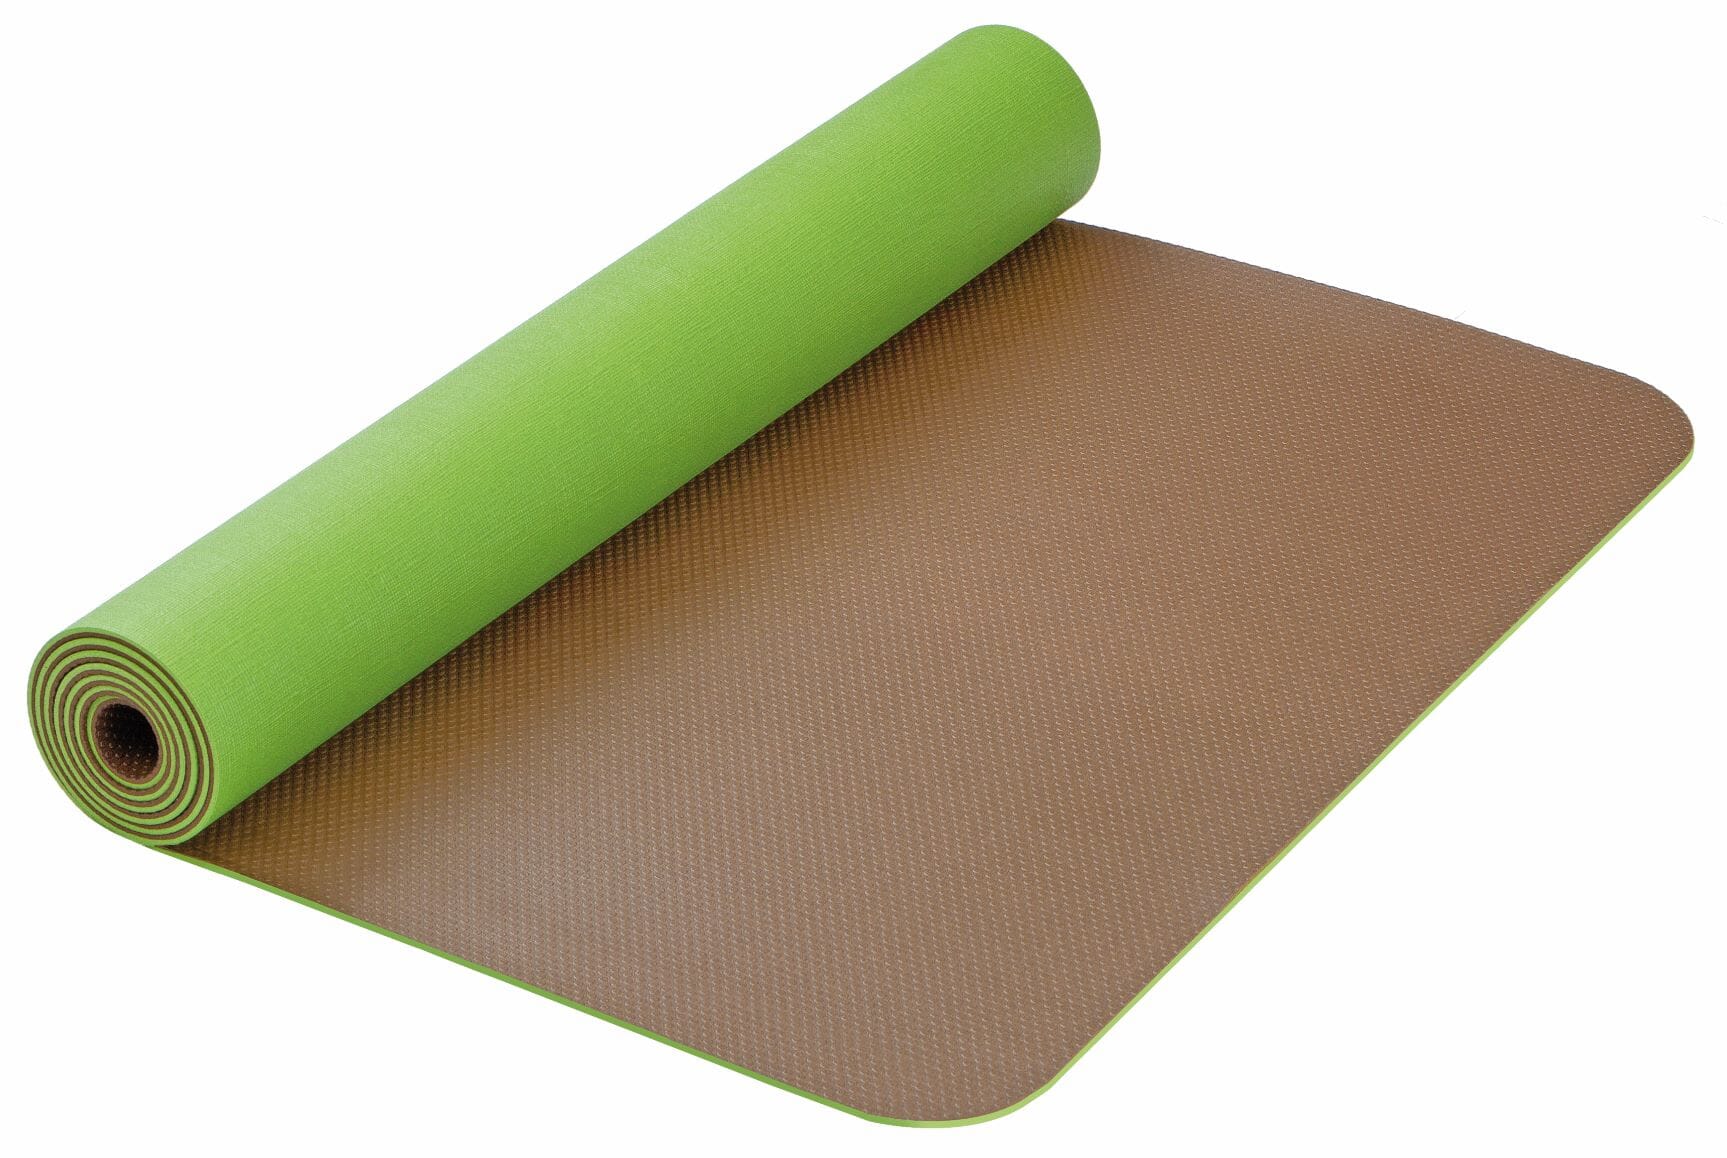 AIREX Calyana Mats - Buy Online at Physical Company